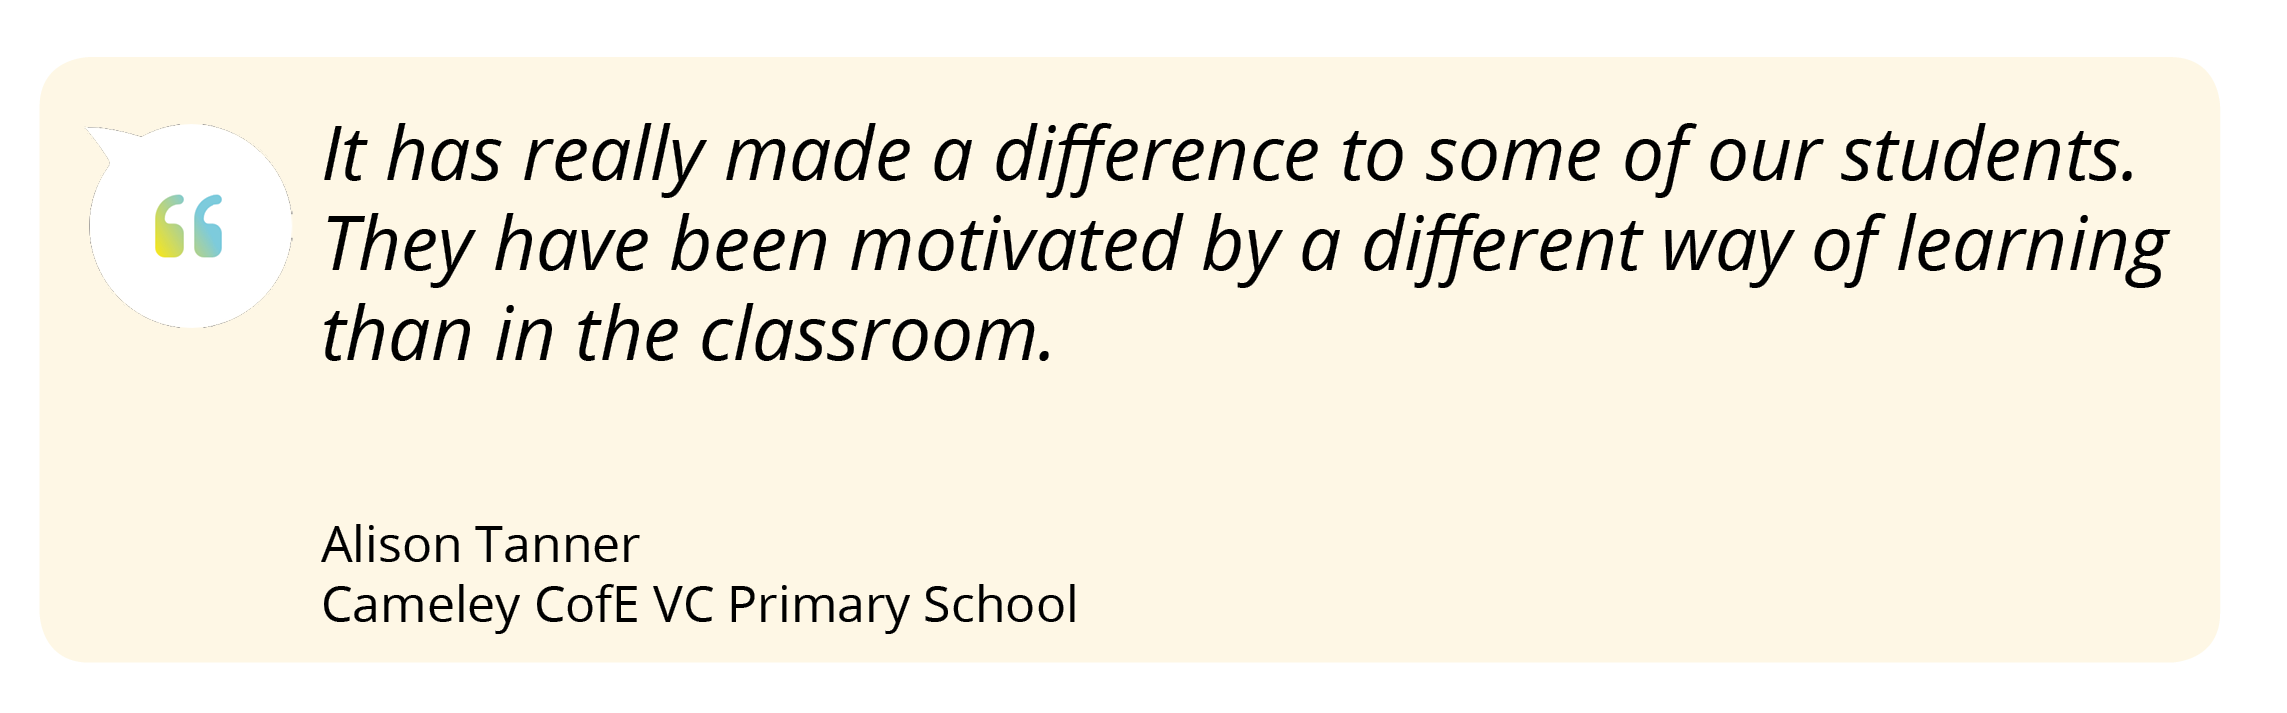 Primary School Quote From A Teacher